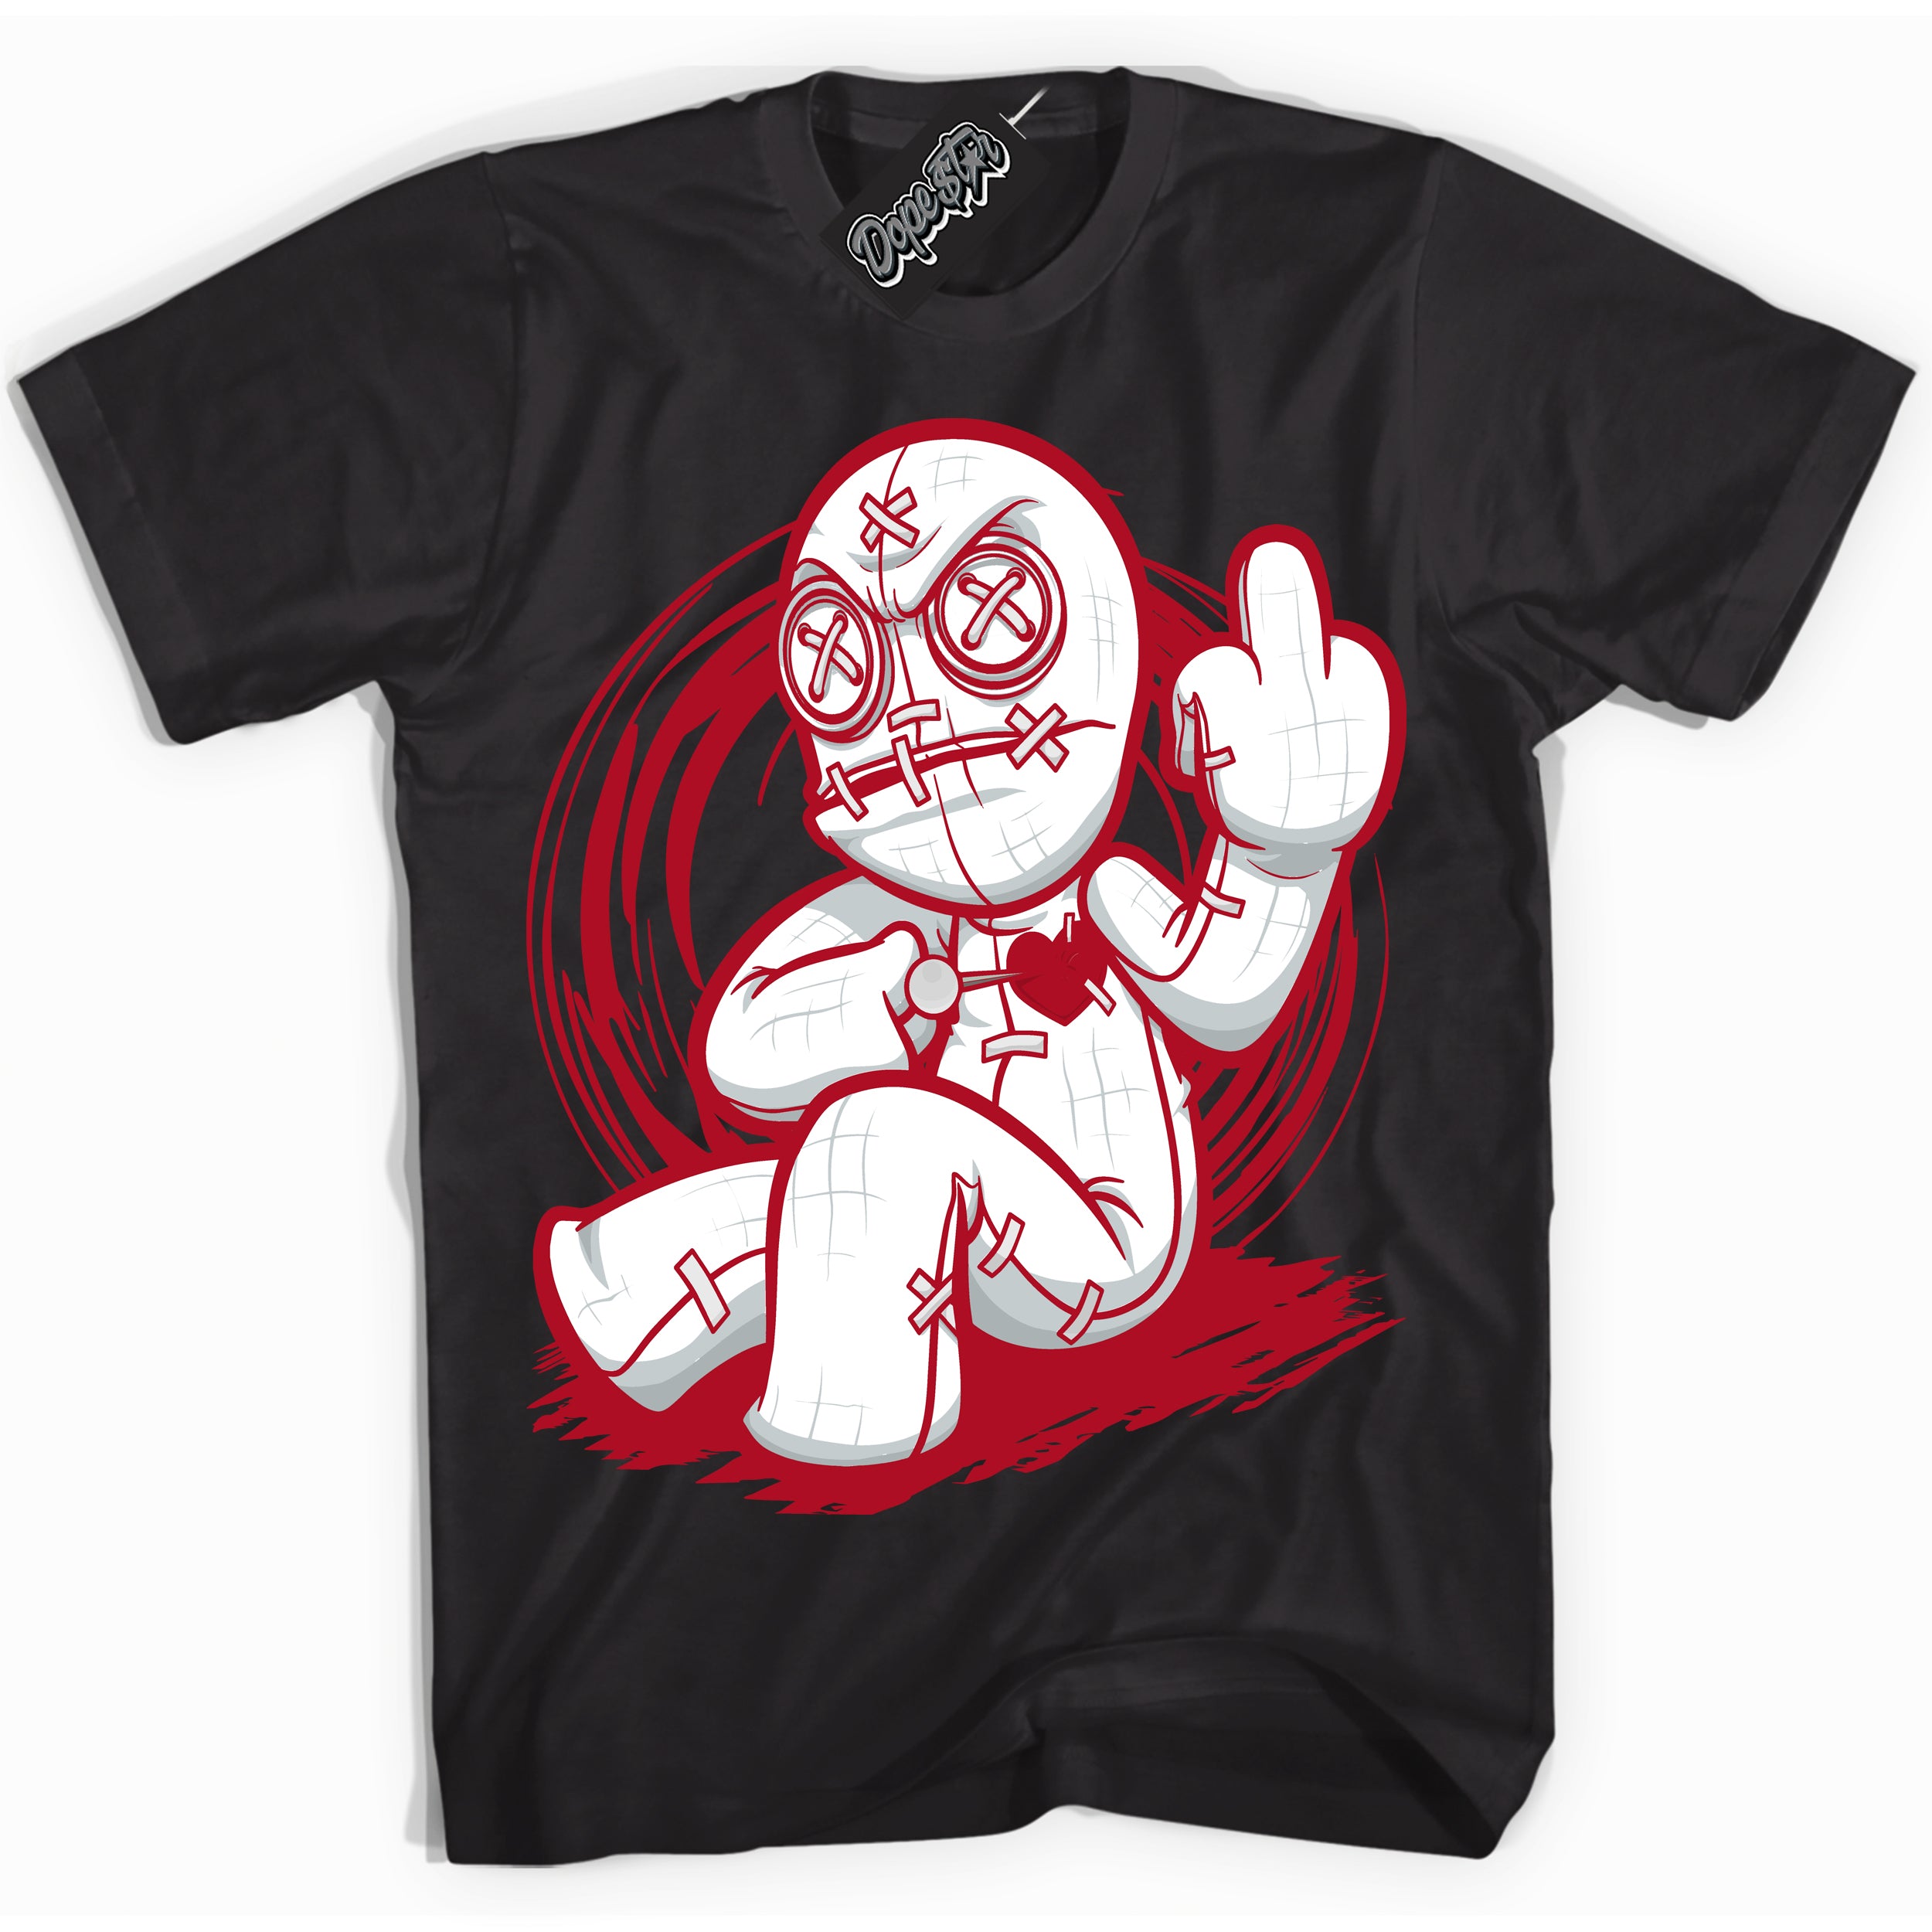 Cool Black Shirt with “ VooDoo Doll” design that perfectly matches Reverse Ultraman Sneakers.